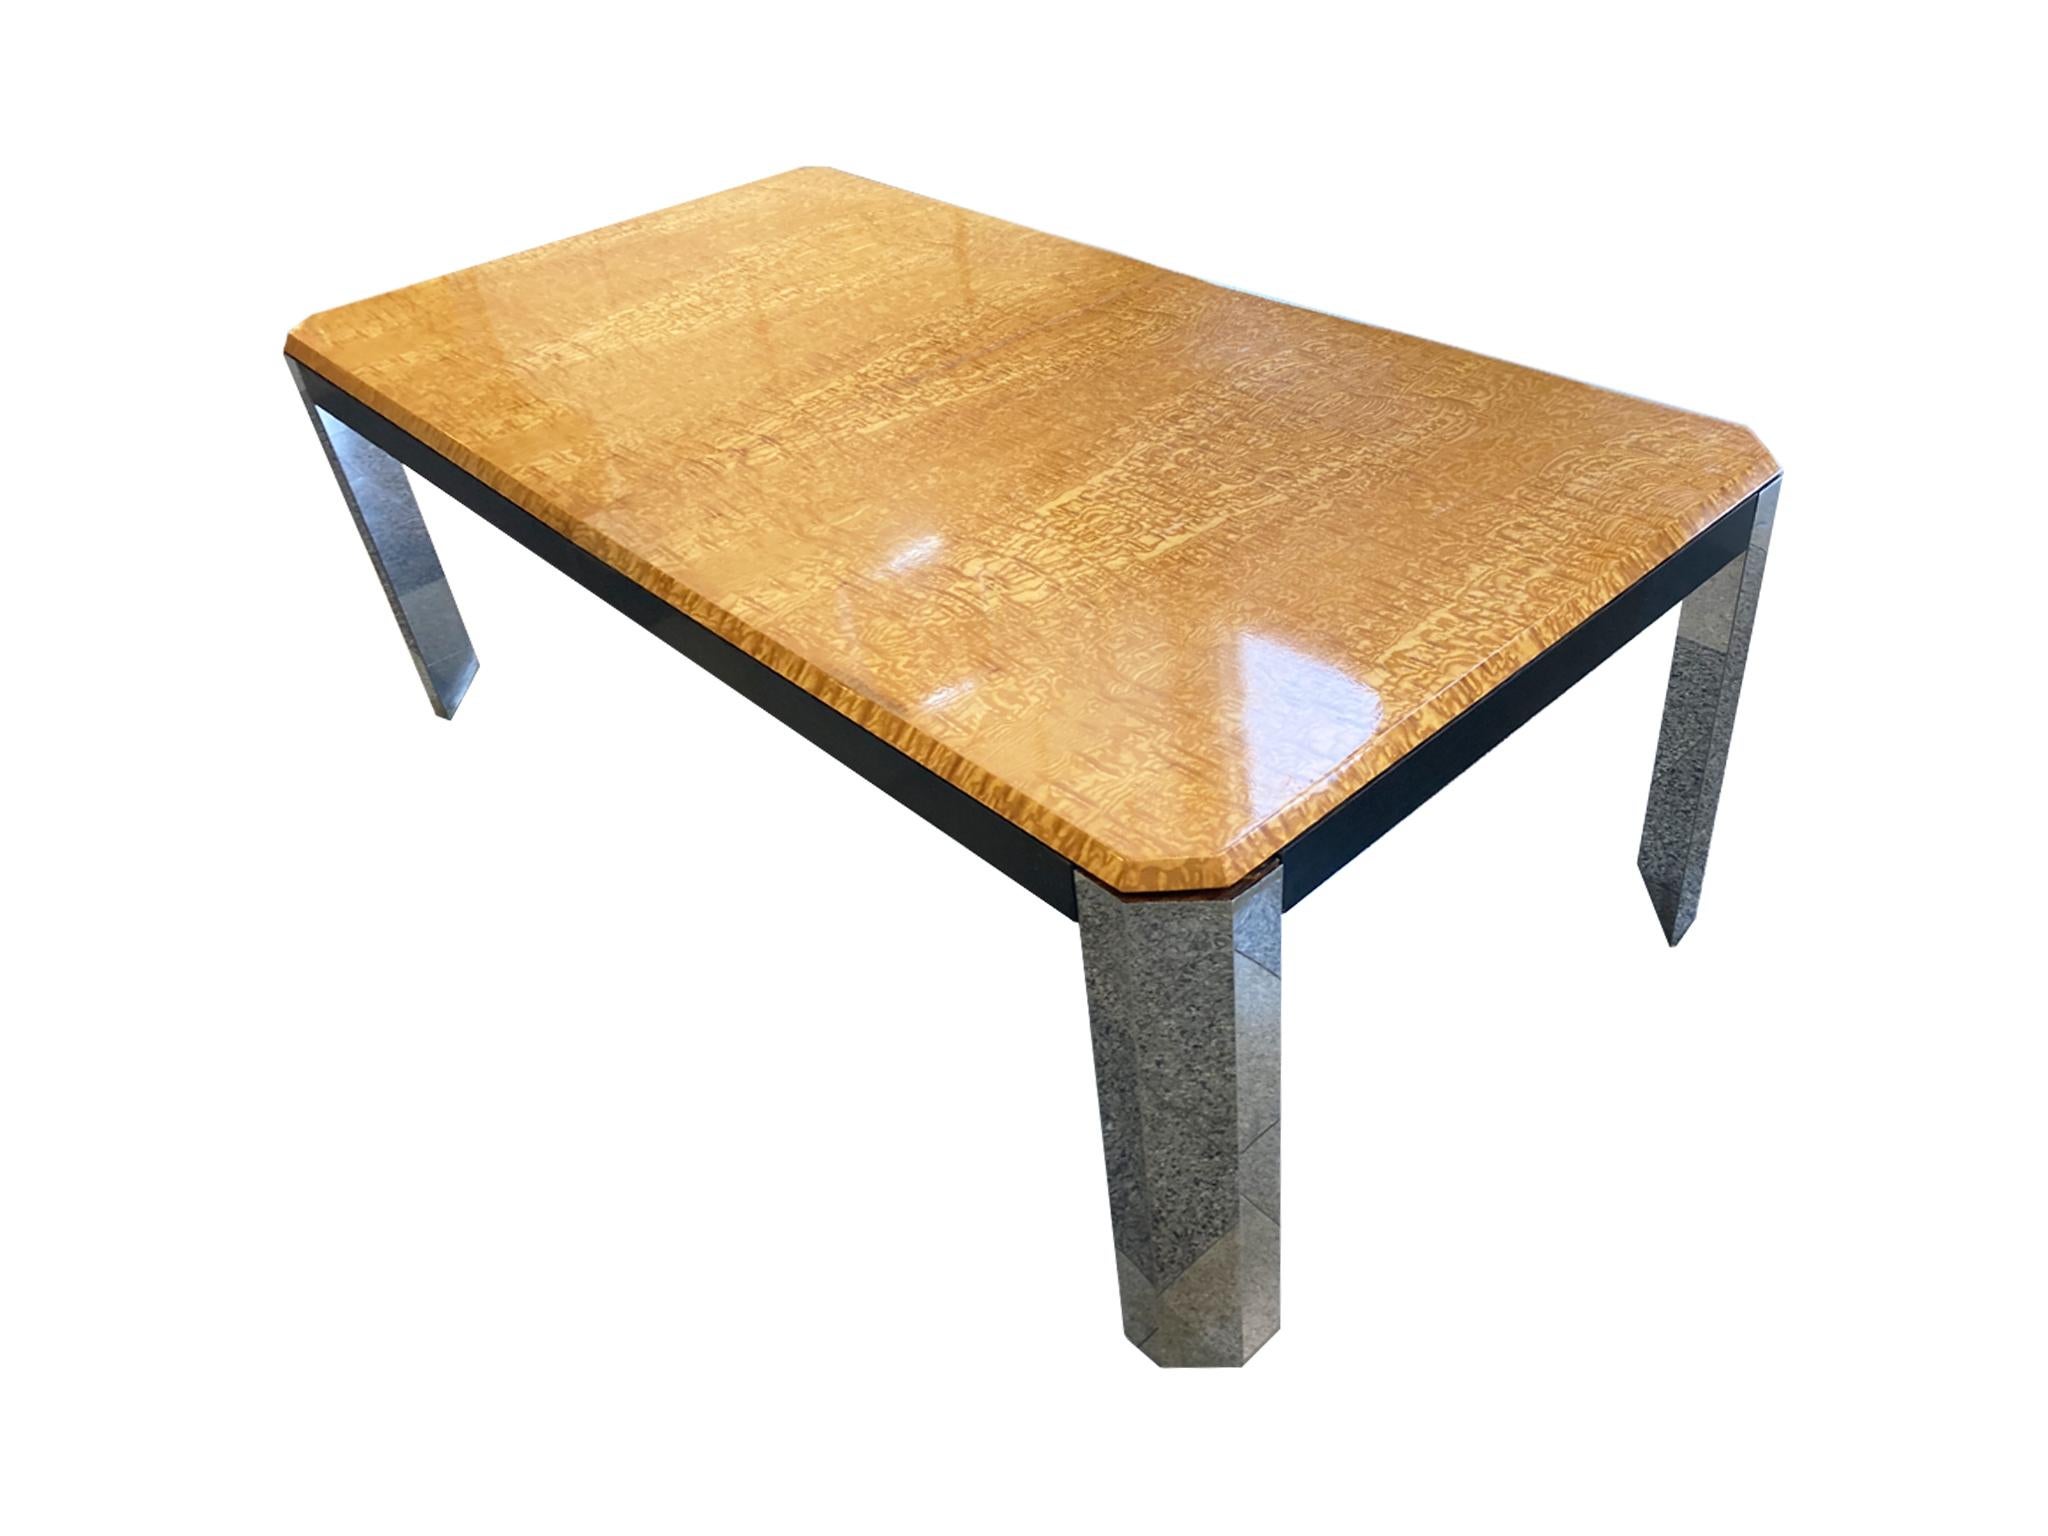 1970s extendable dining table in the style of Milo Baughman. This table combines Mid-Century Modern simplicity with the embellishment of materials like burlwood and chrome. The tabletop is patterned with a honey-yellow burl, while the legs are